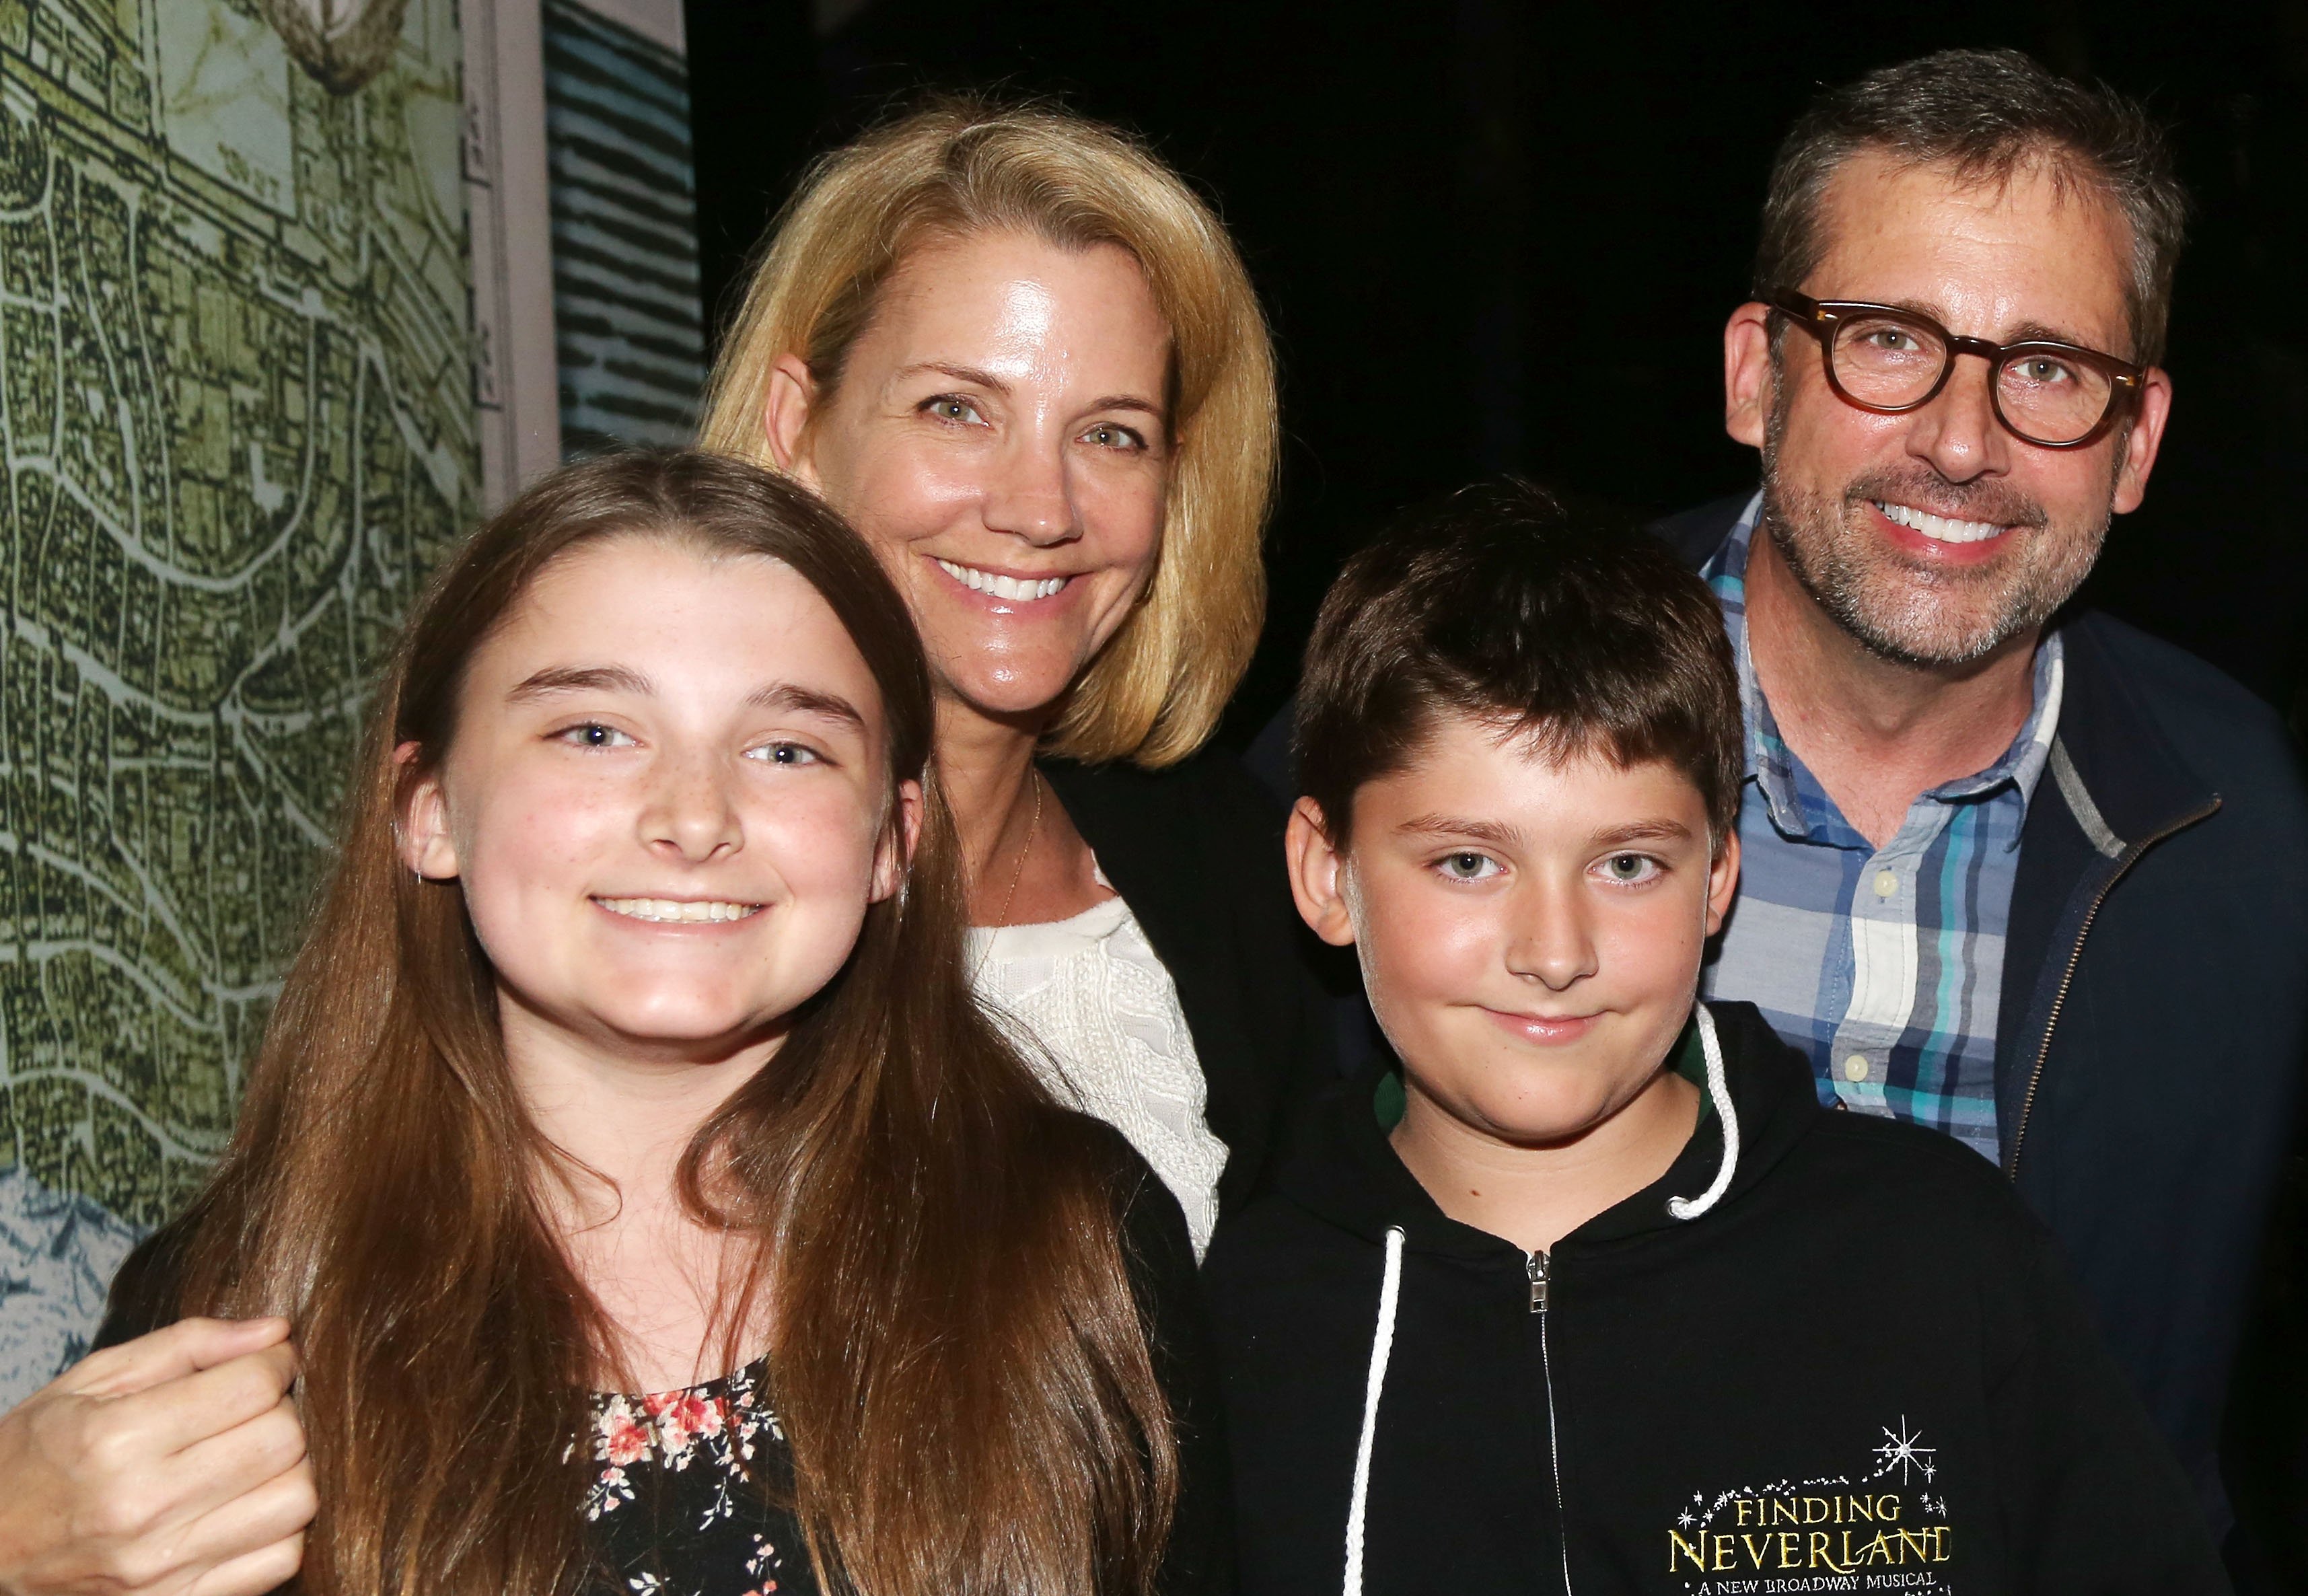  Elisabeth Anne Carell, Nancy Carell, John Carell and Steve Carell pose backstage at the hit musical "Finding Neverland" on Broadway at The Lunt Fontanne Theater on June 23, 2015 in New York City. | Source: Getty Images